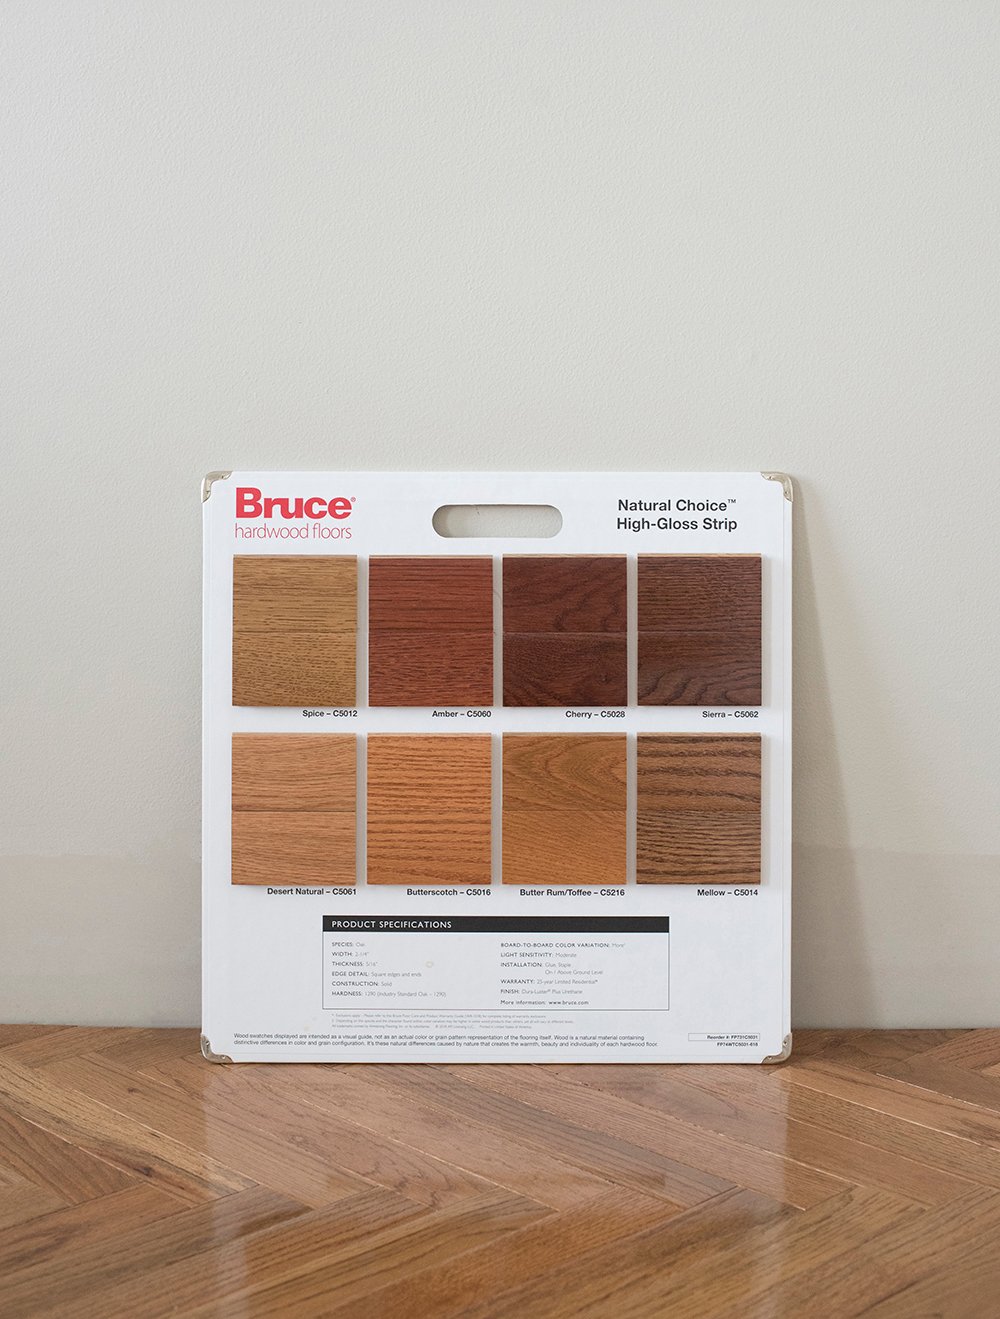 Bruce Hardwood Flooring Room For Tuesday, Is Bruce Hardwood Flooring Any Good